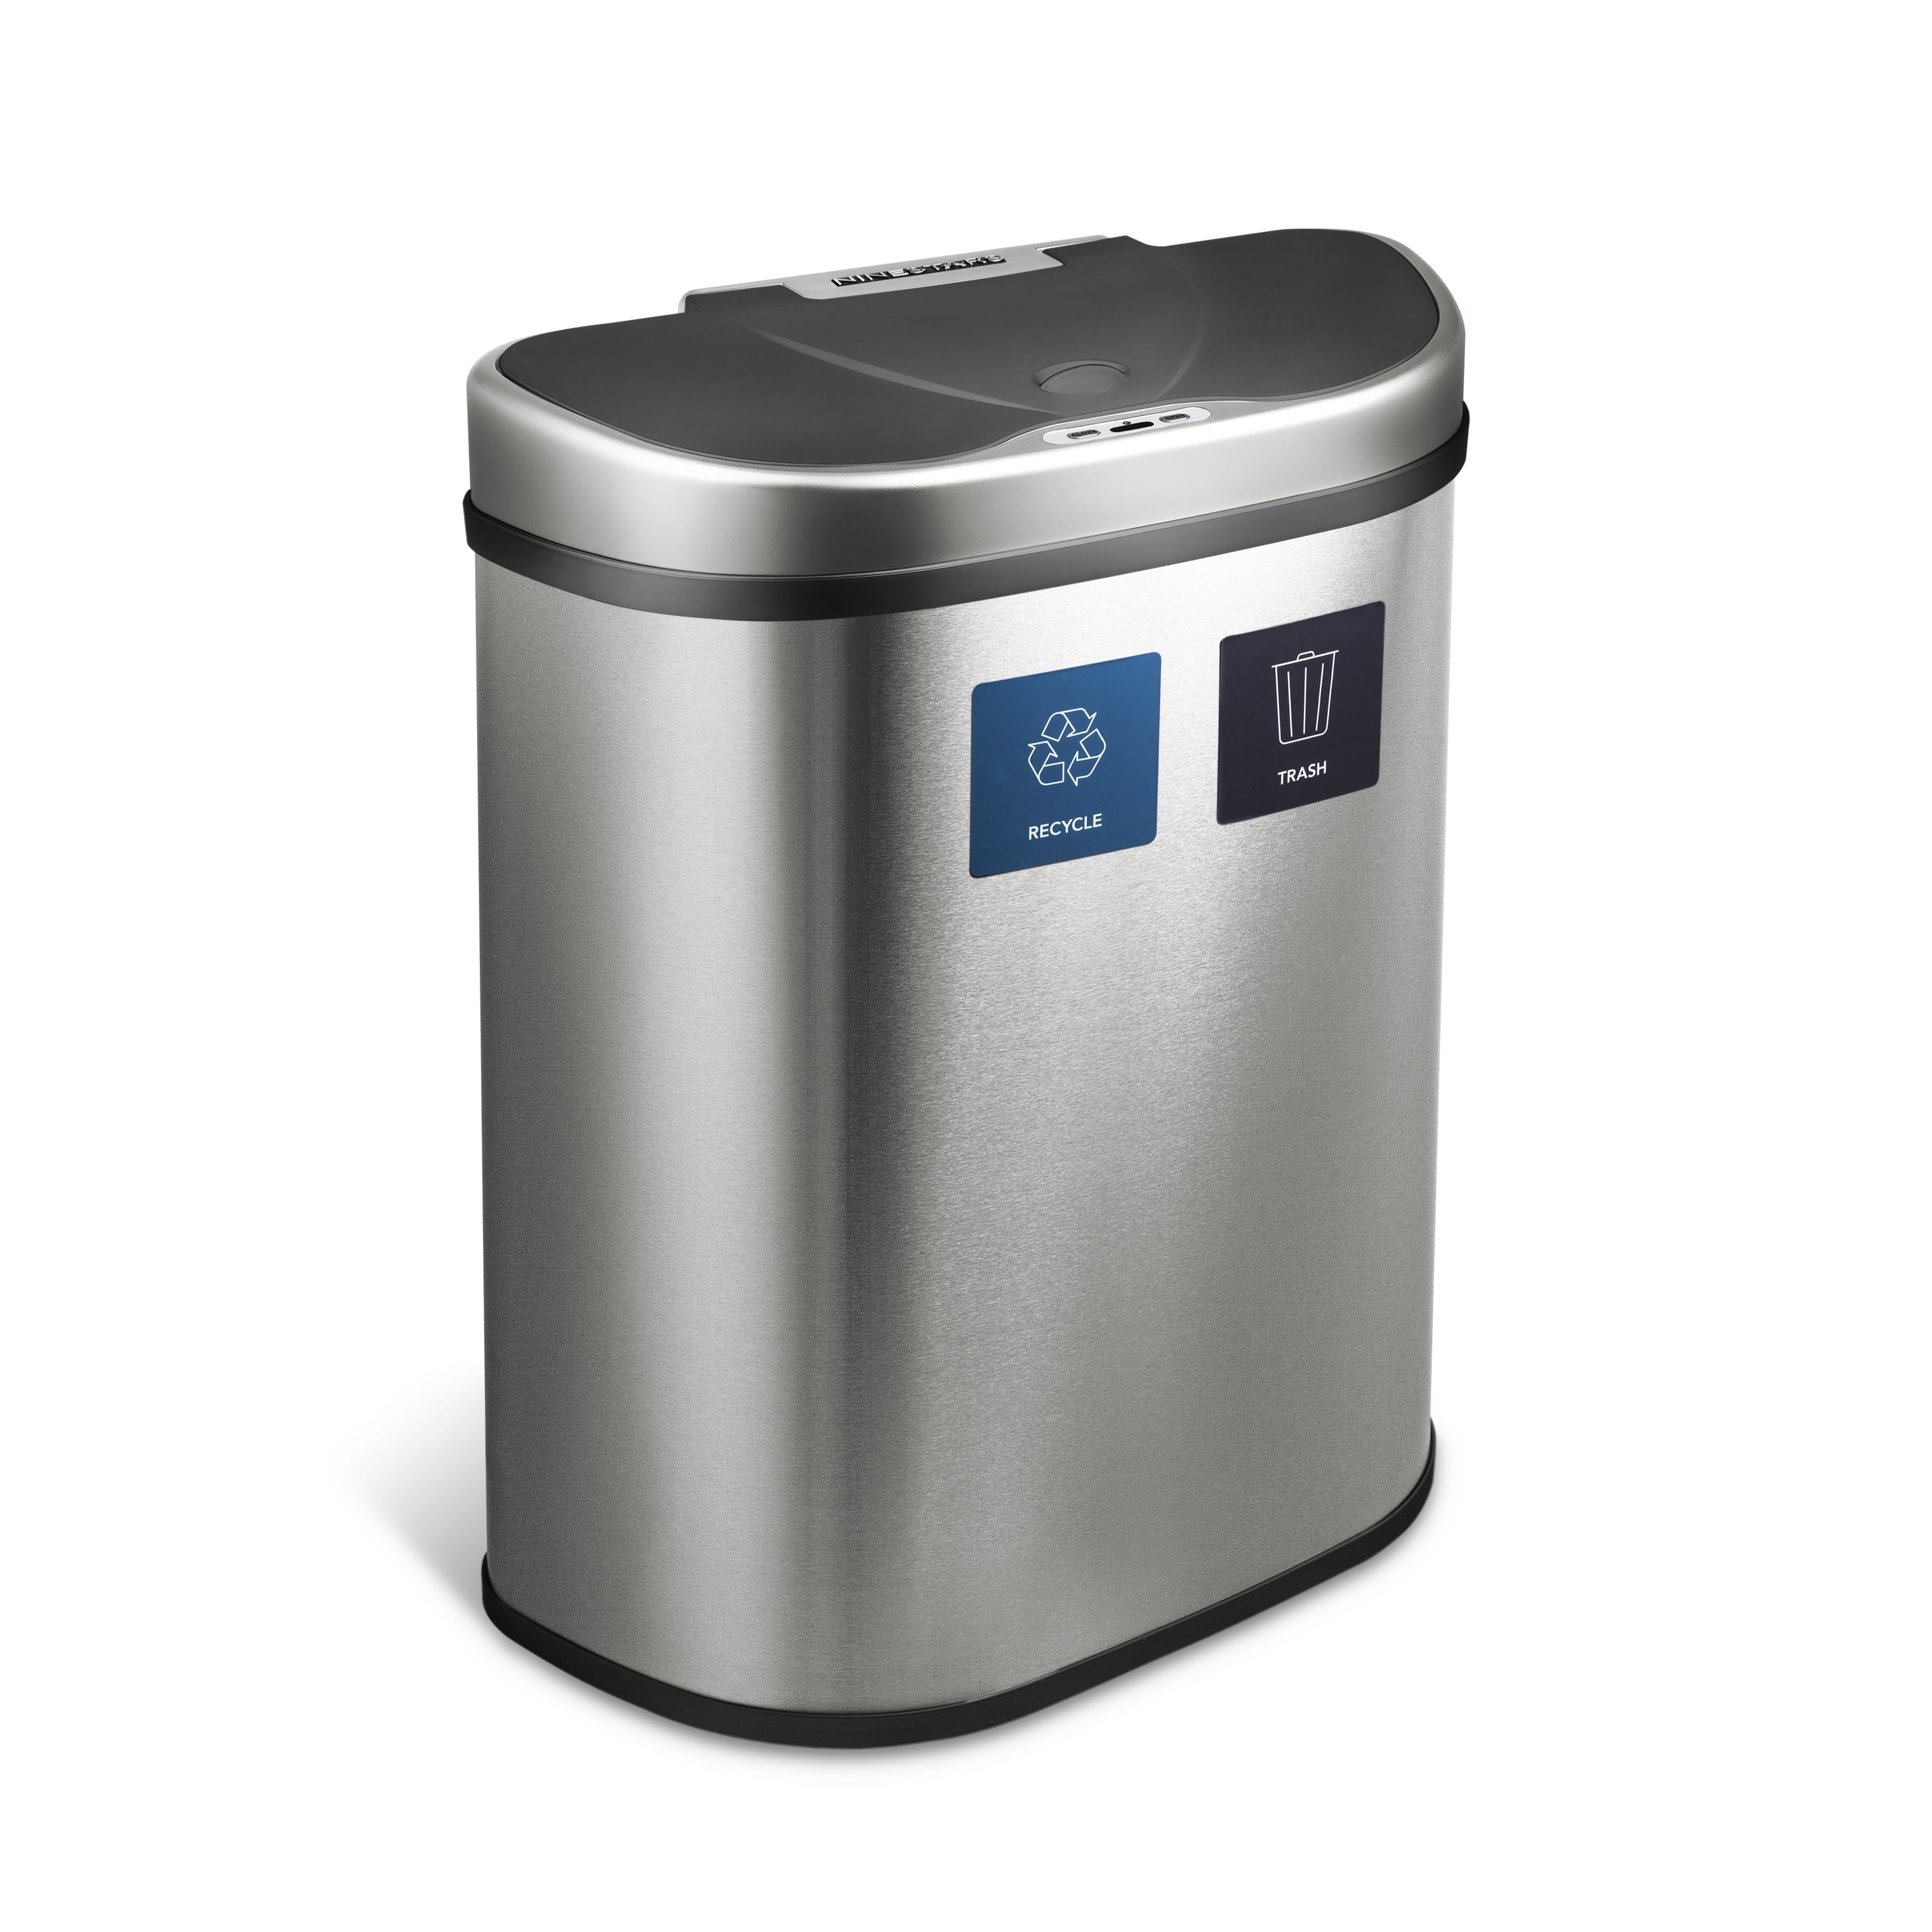 Motion Sensor Recycling Bin Trash Can Container Auto Dual Compartment 18.5 gal. 